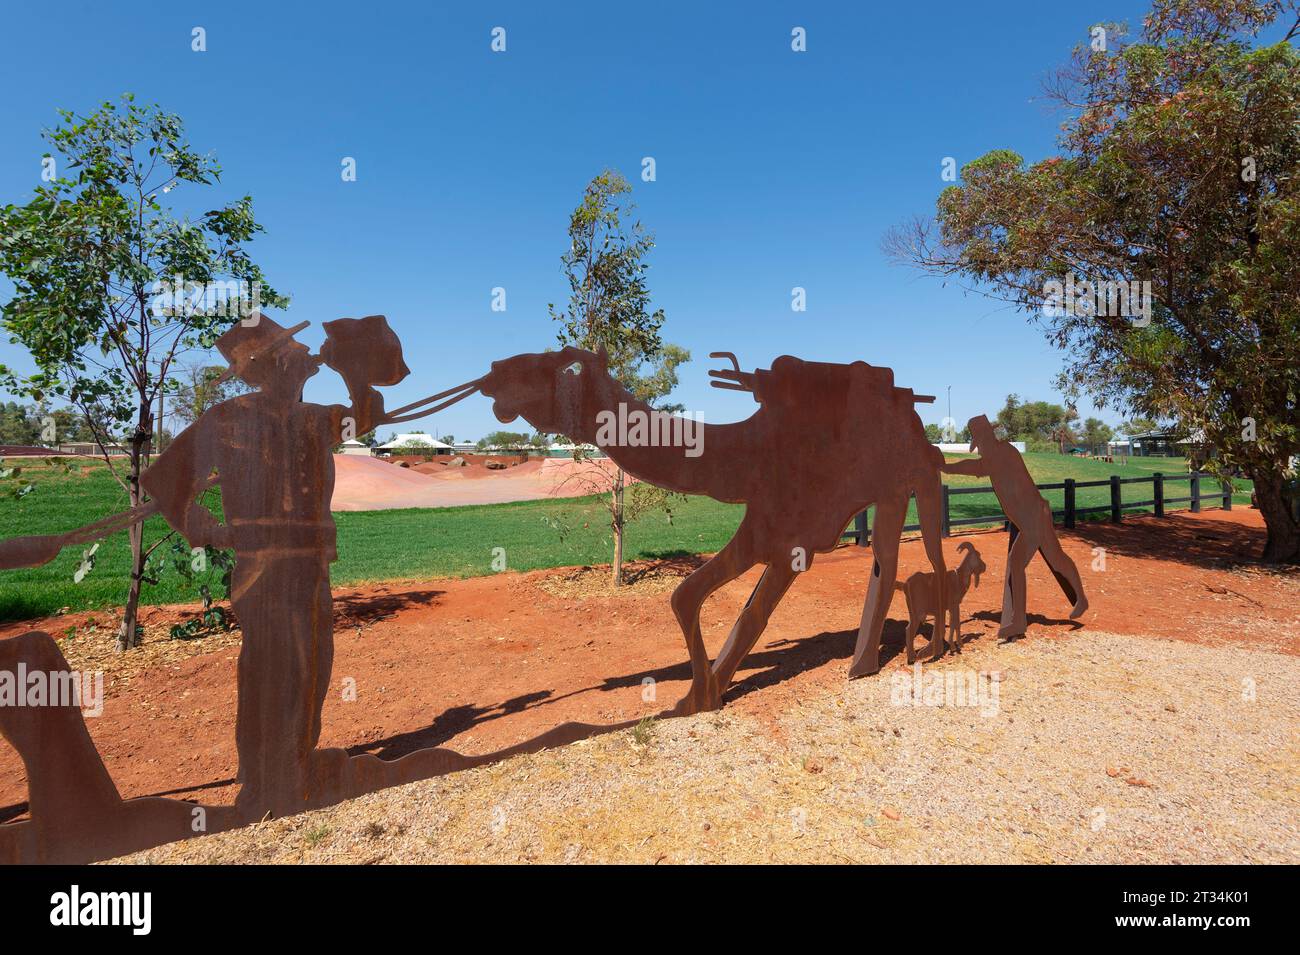 Metal sculptures depicting the 1906 Alfred Canning expedition to map the Canning Stock Route, Wiluna, Western Australia, Australia Stock Photo